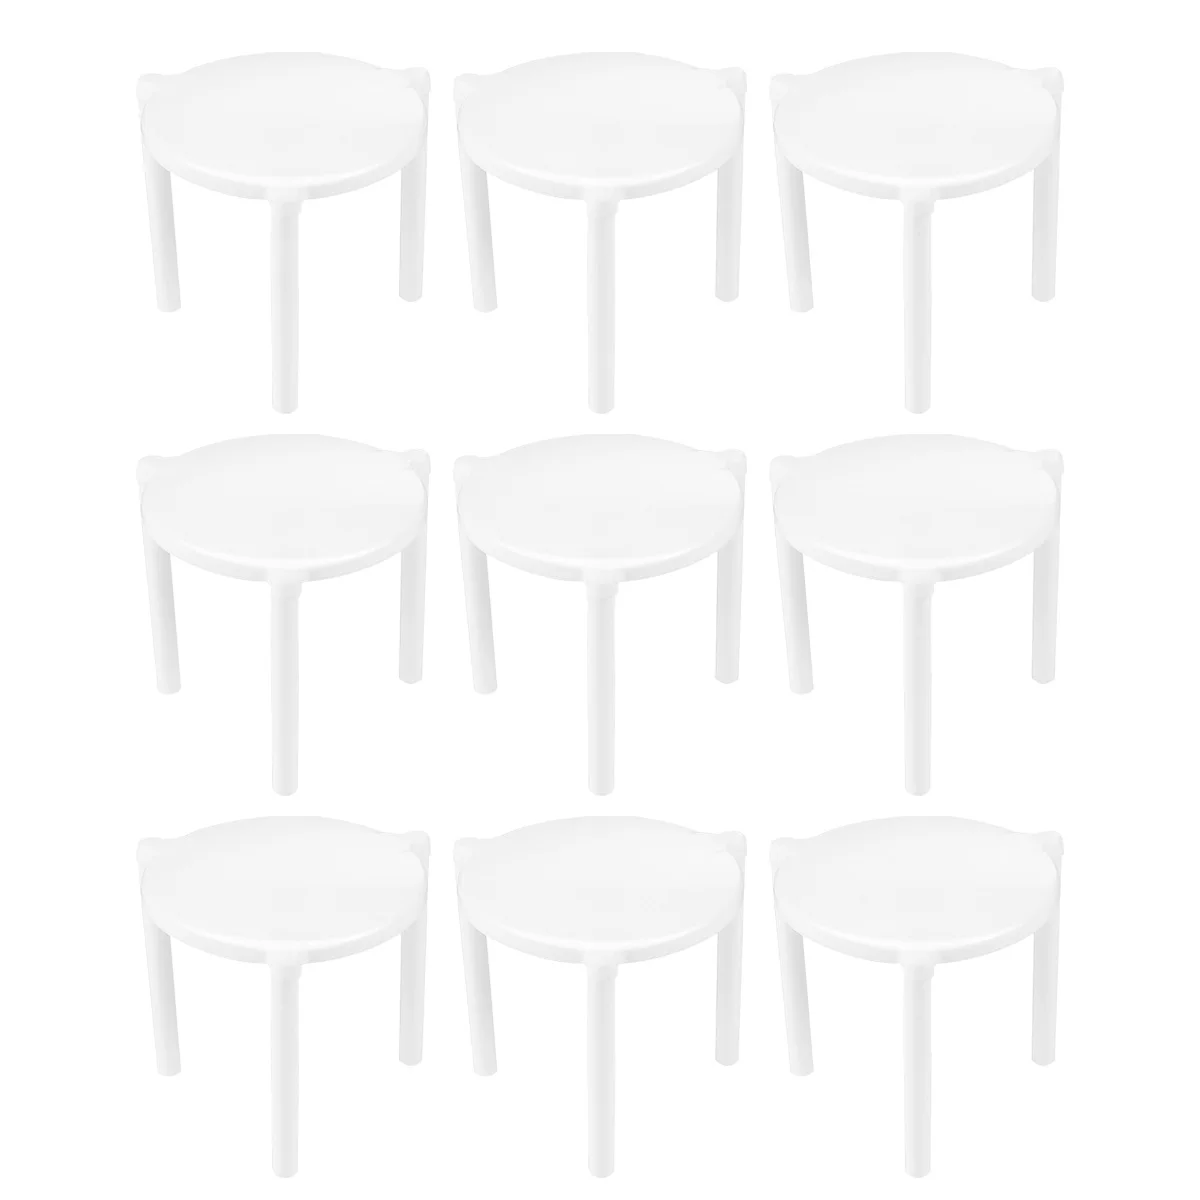 

Pizza Stand Saver Tripod Box Stack Support Stands Table Tabletop Takeaway Takeout Tray Frame Tables Boxes Pie White De Serving